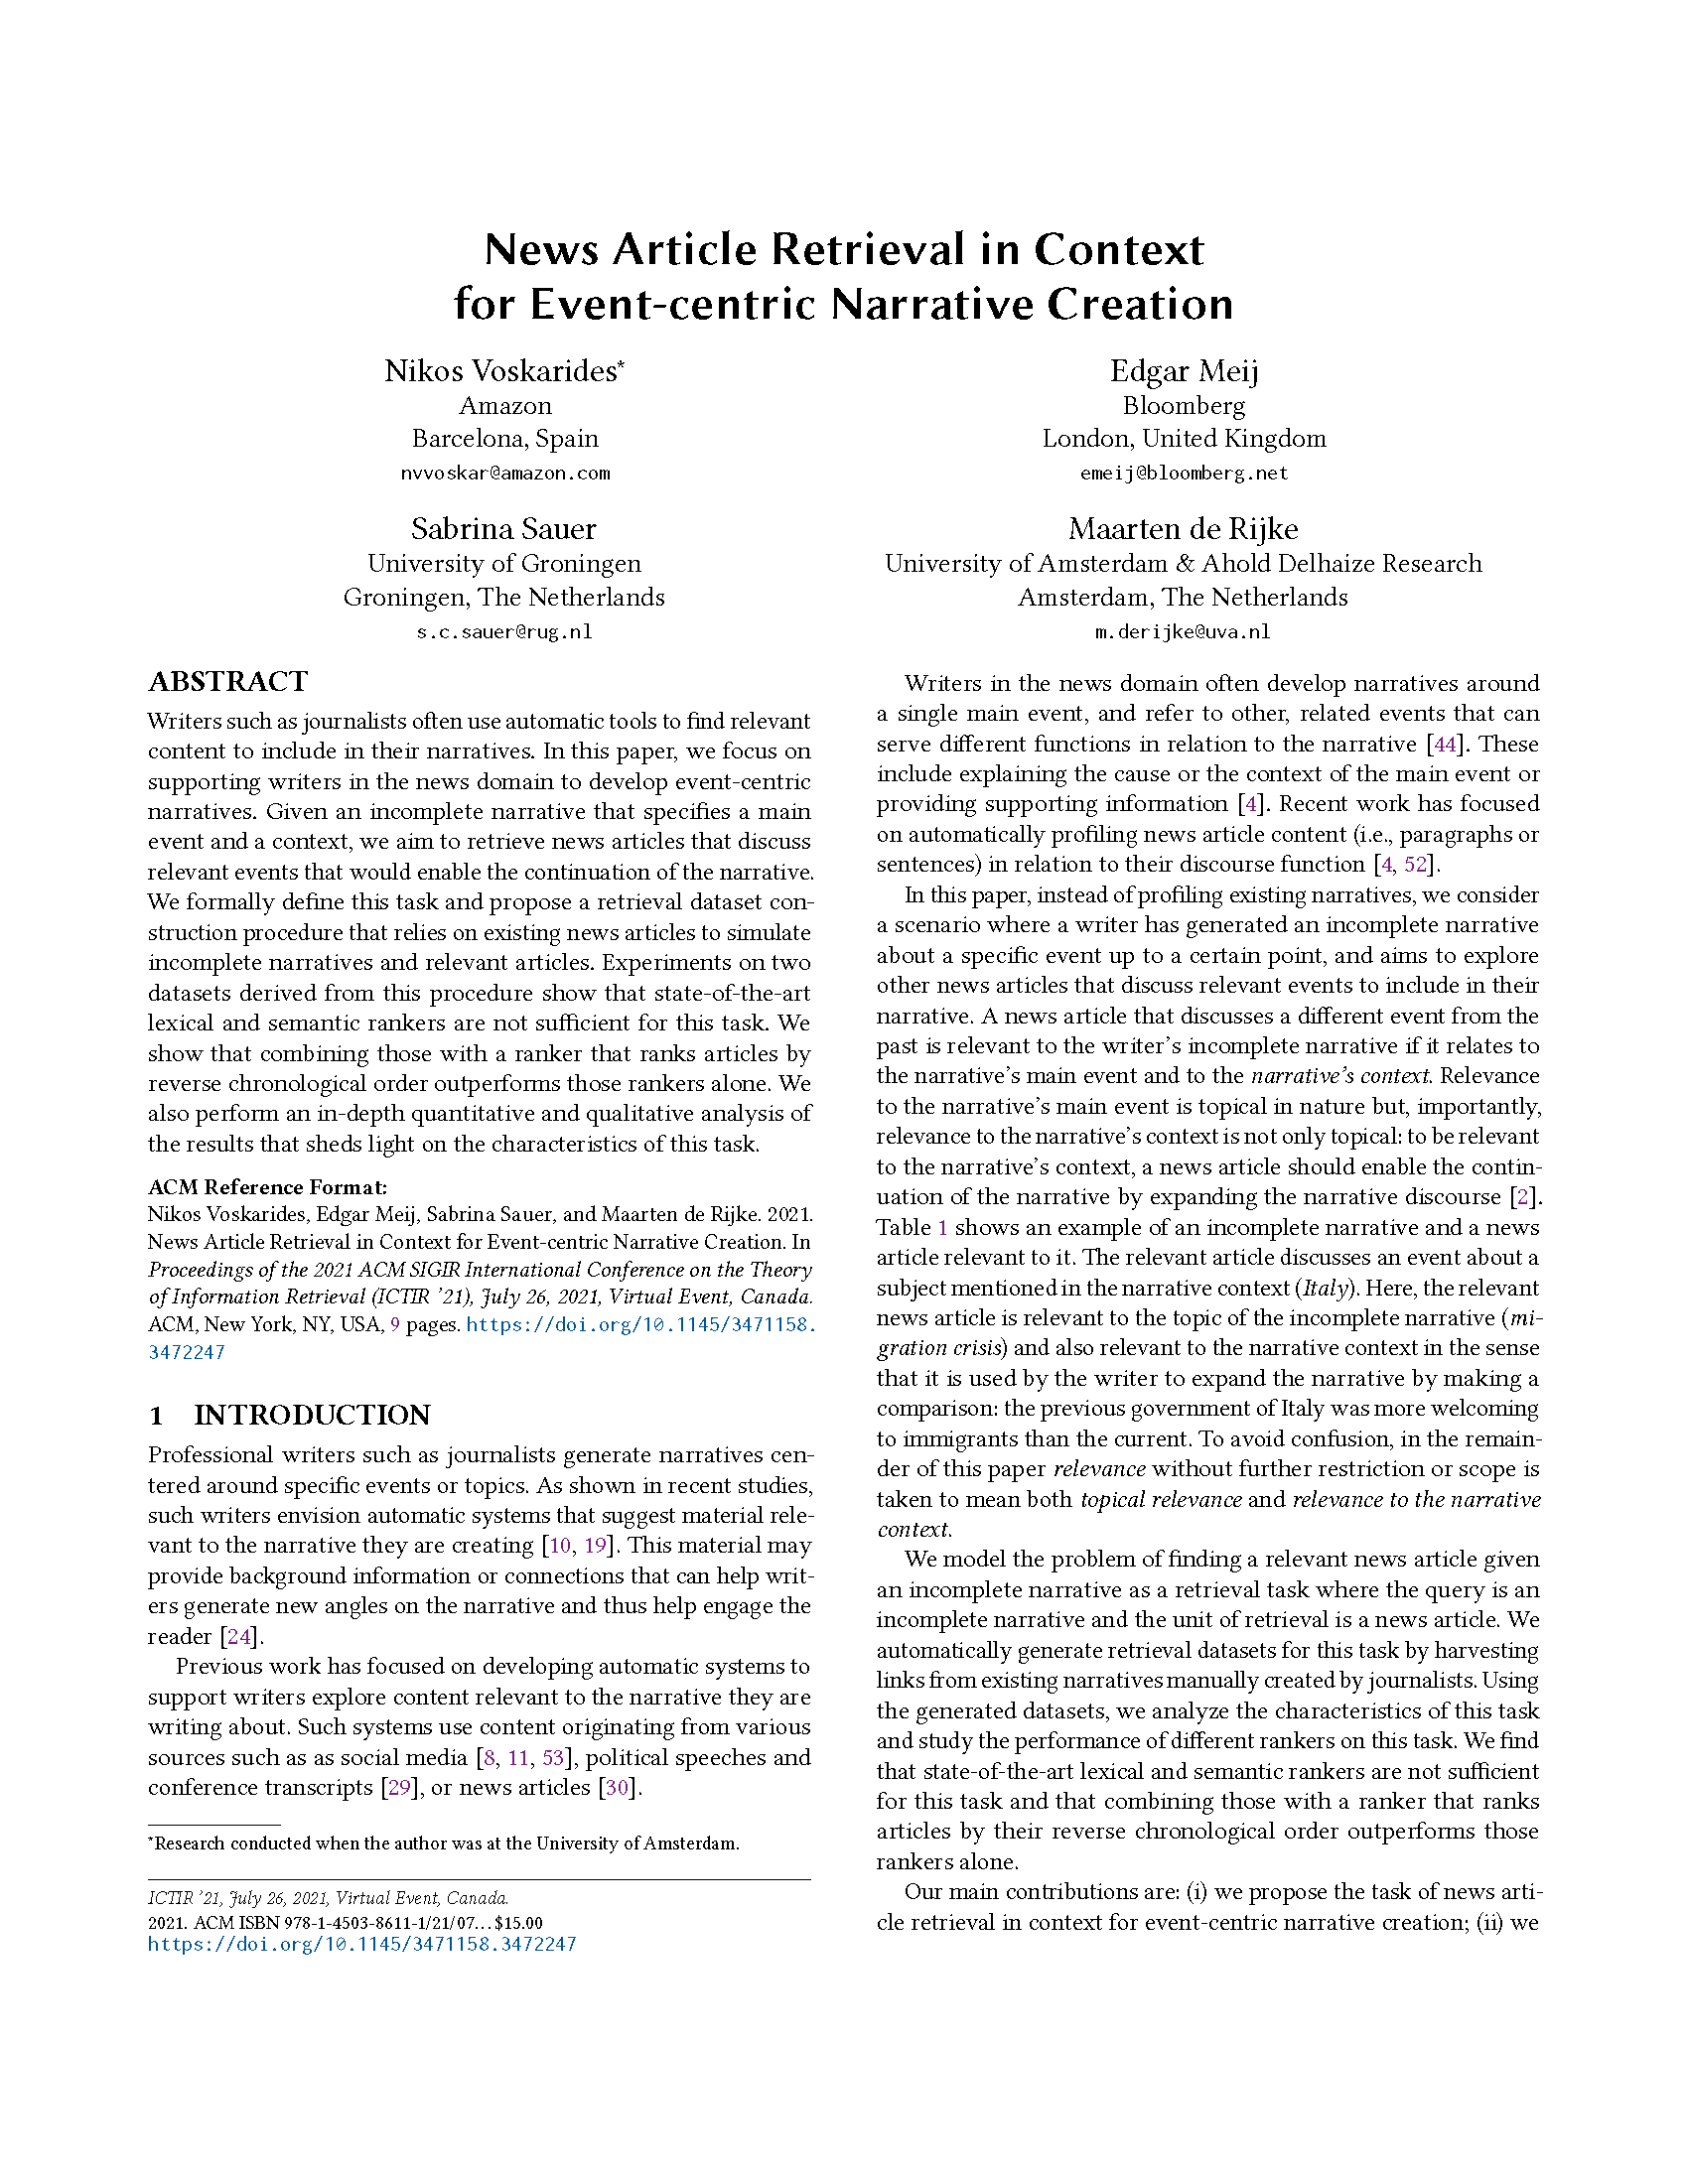 Click to read "News Article Retrieval in Context for Event-centric Narrative Creation," published July 11, 2021 at ICTIR 2021